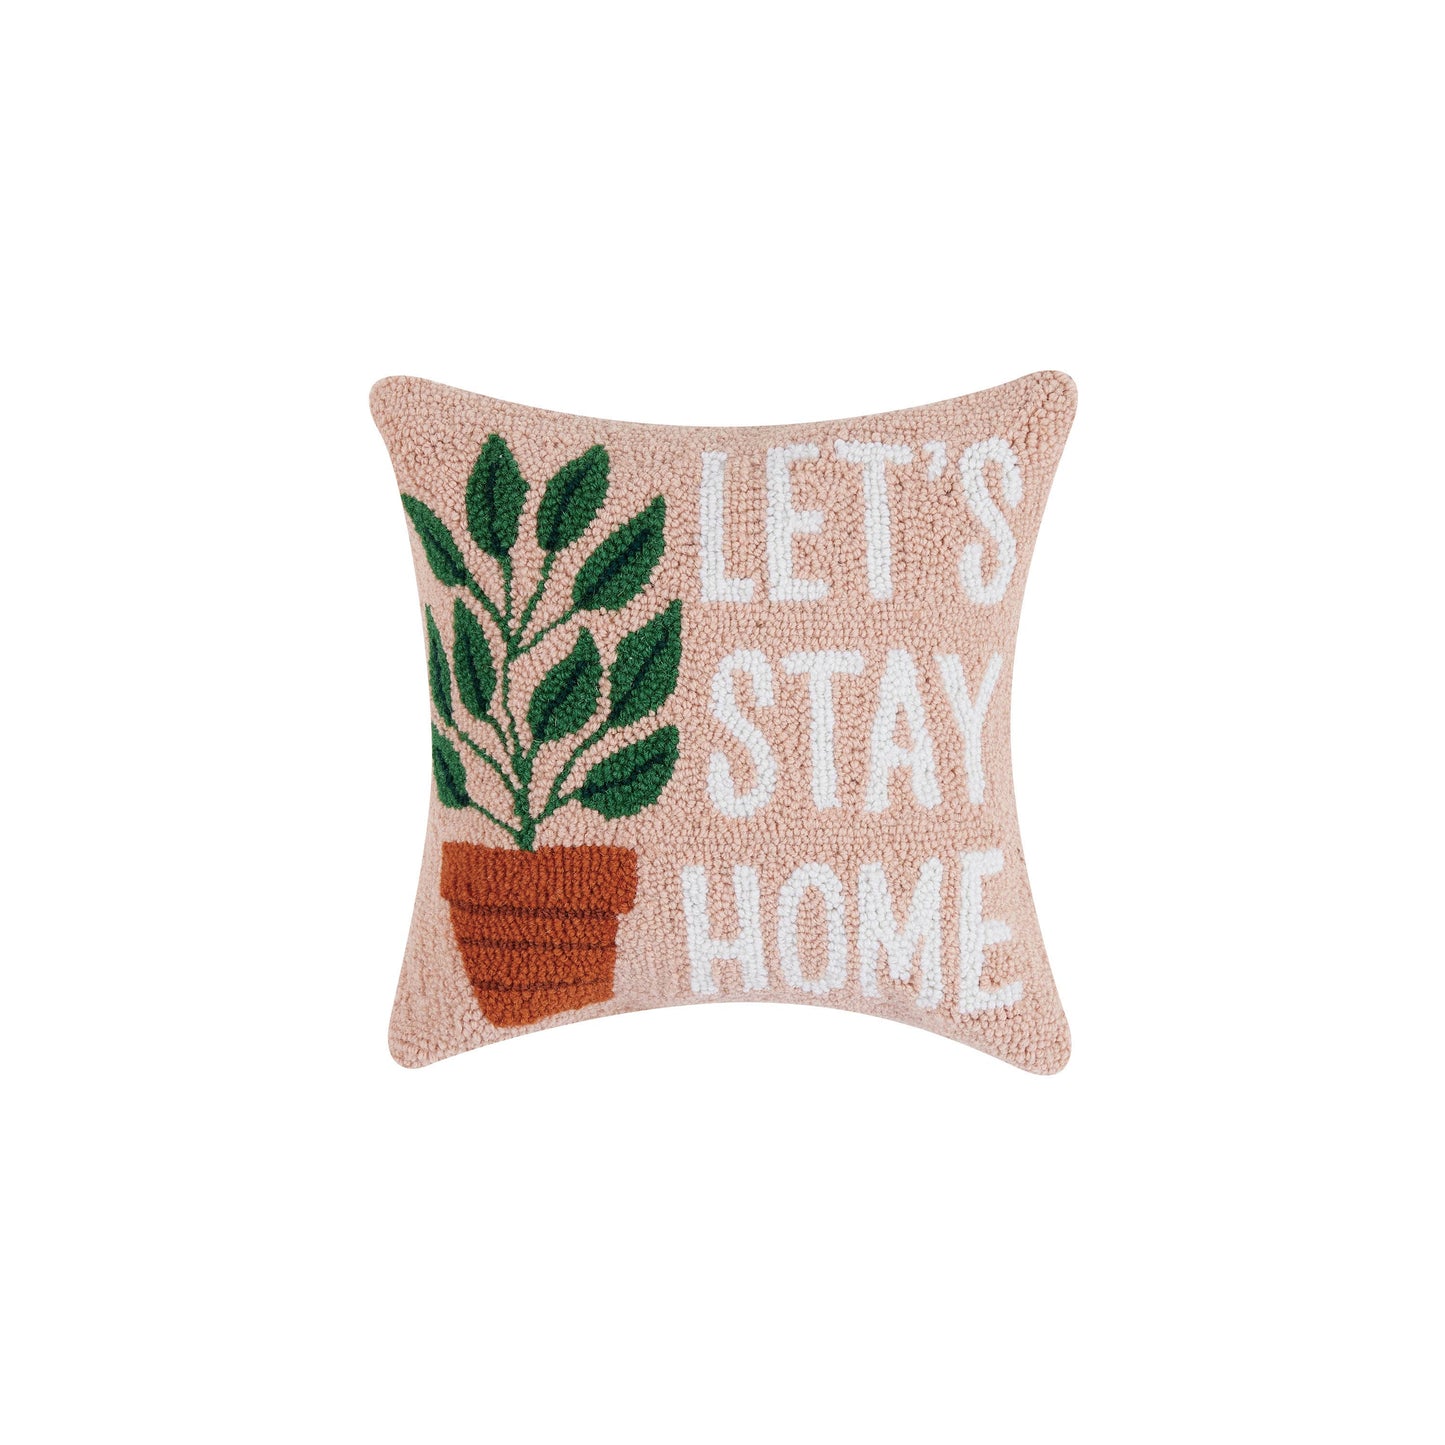 Let's Stay Home Hook Pillow